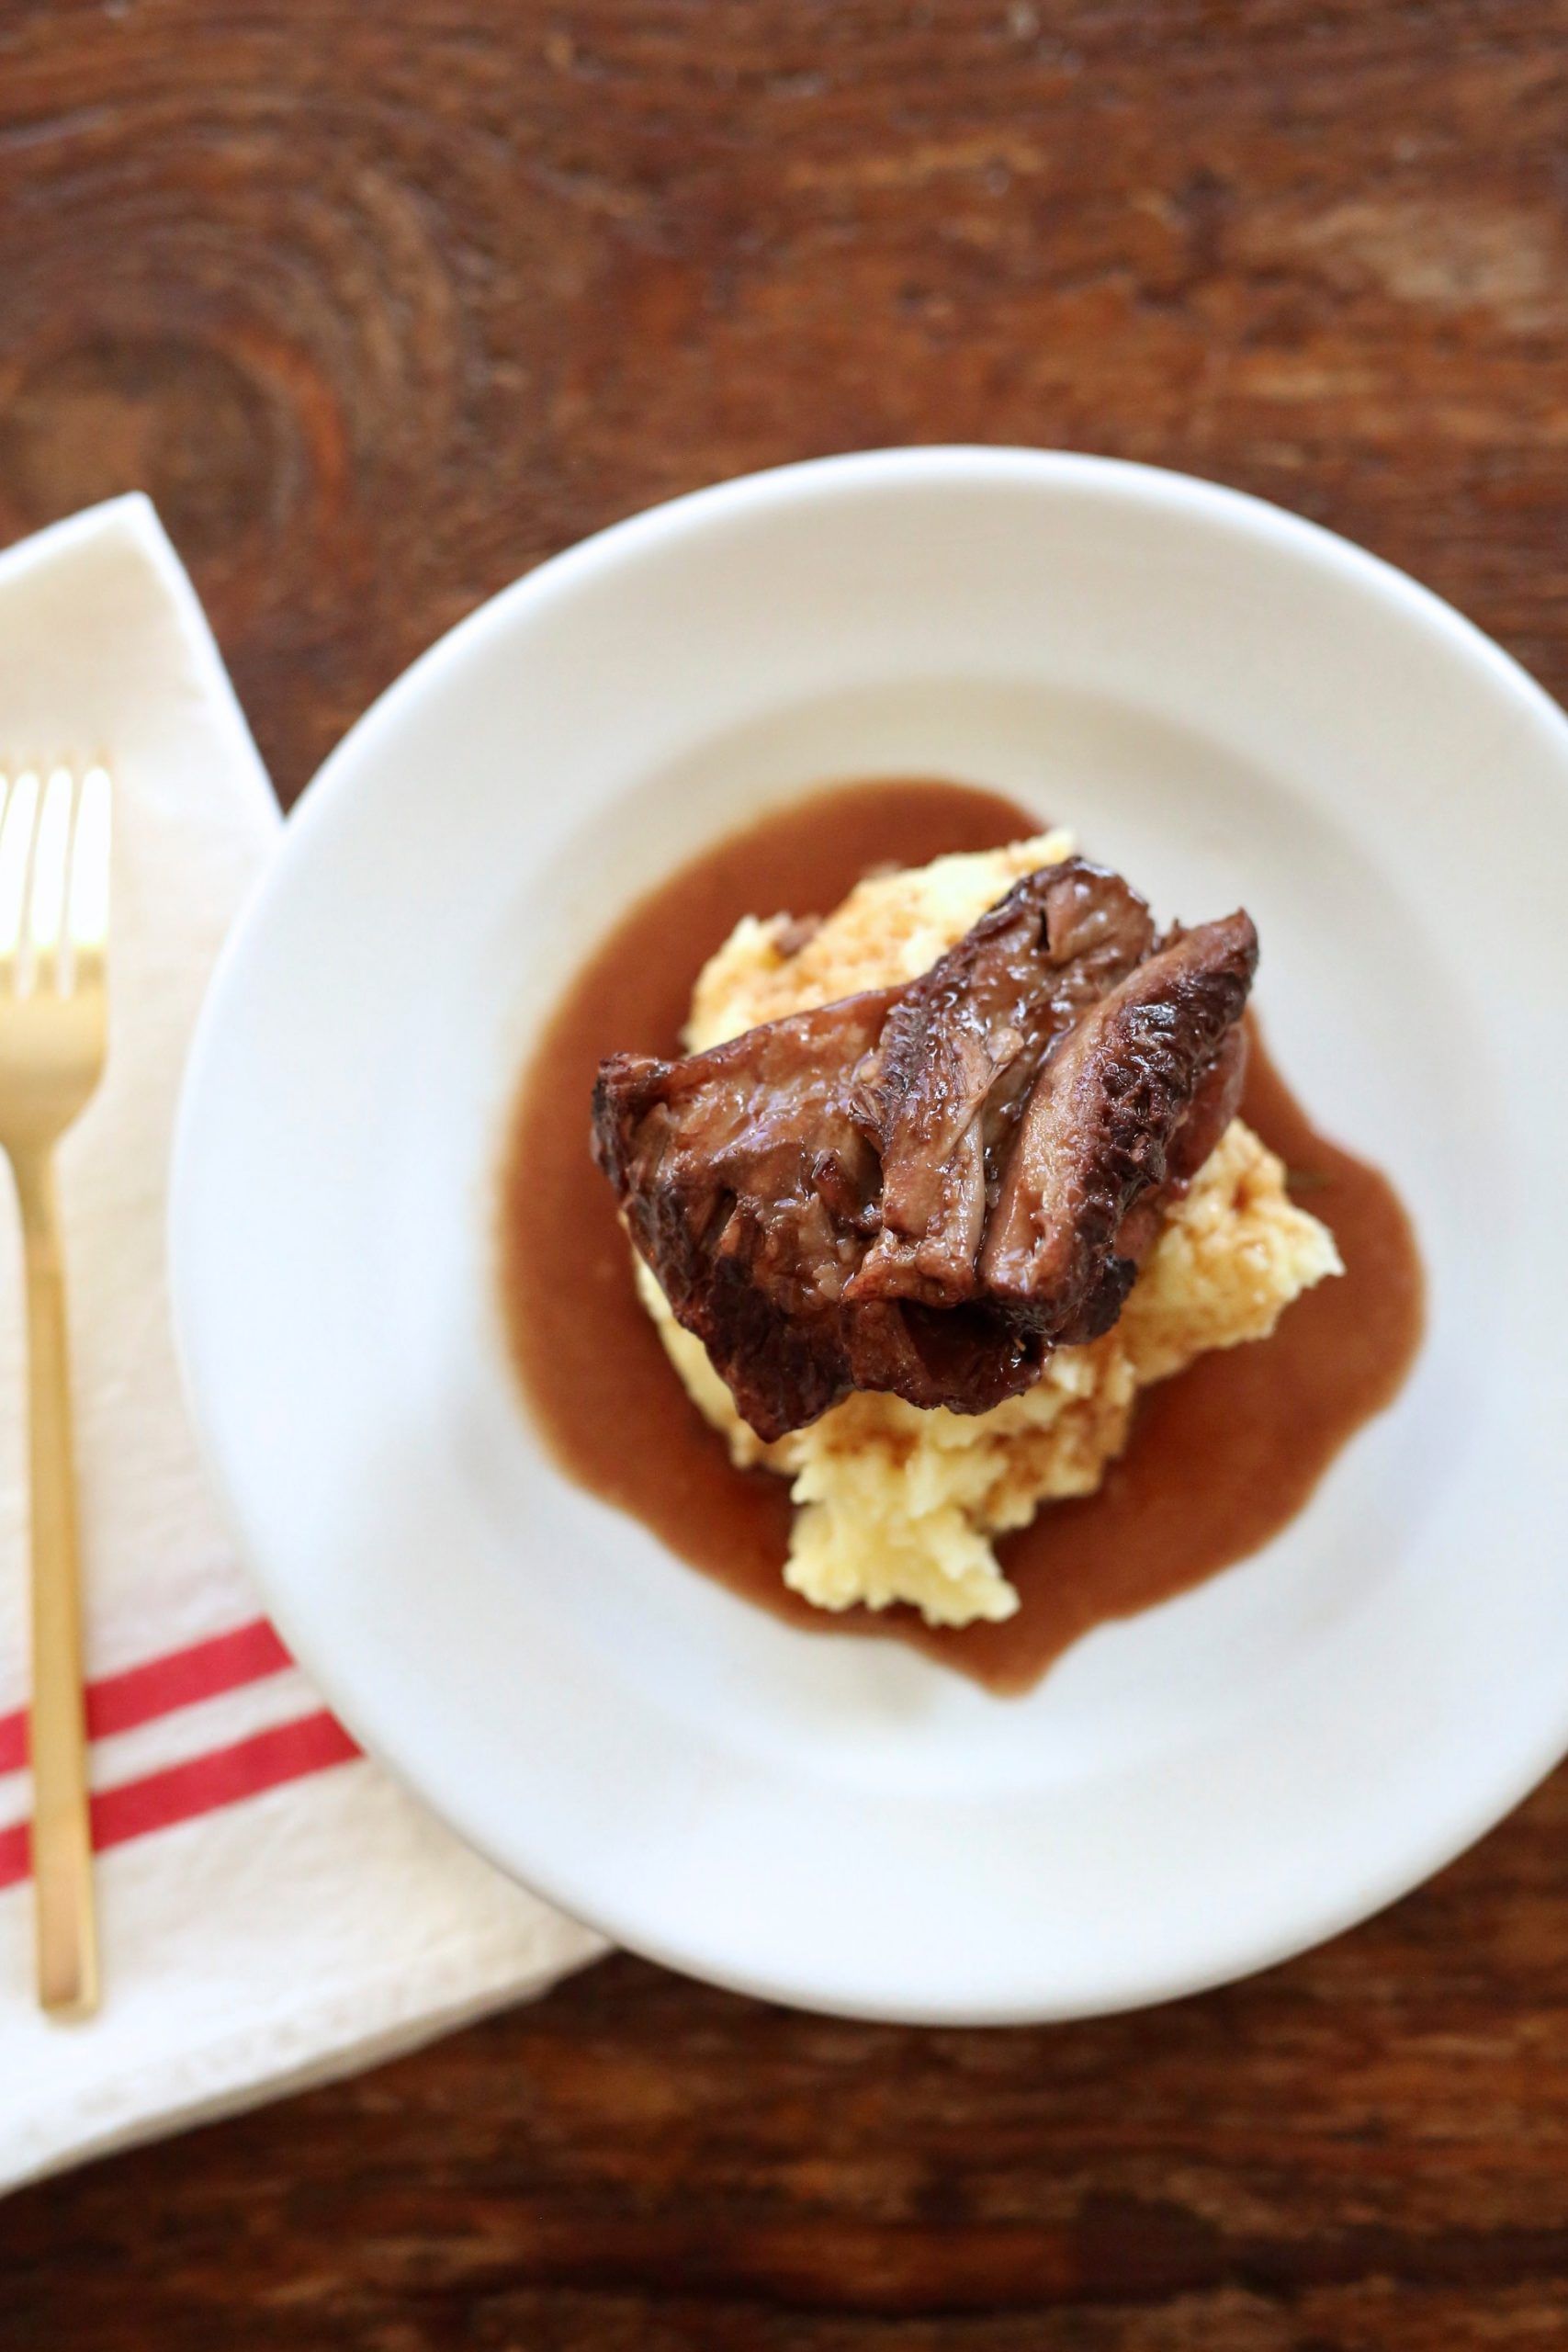 Braised Short Ribs over Mashed Potatoes